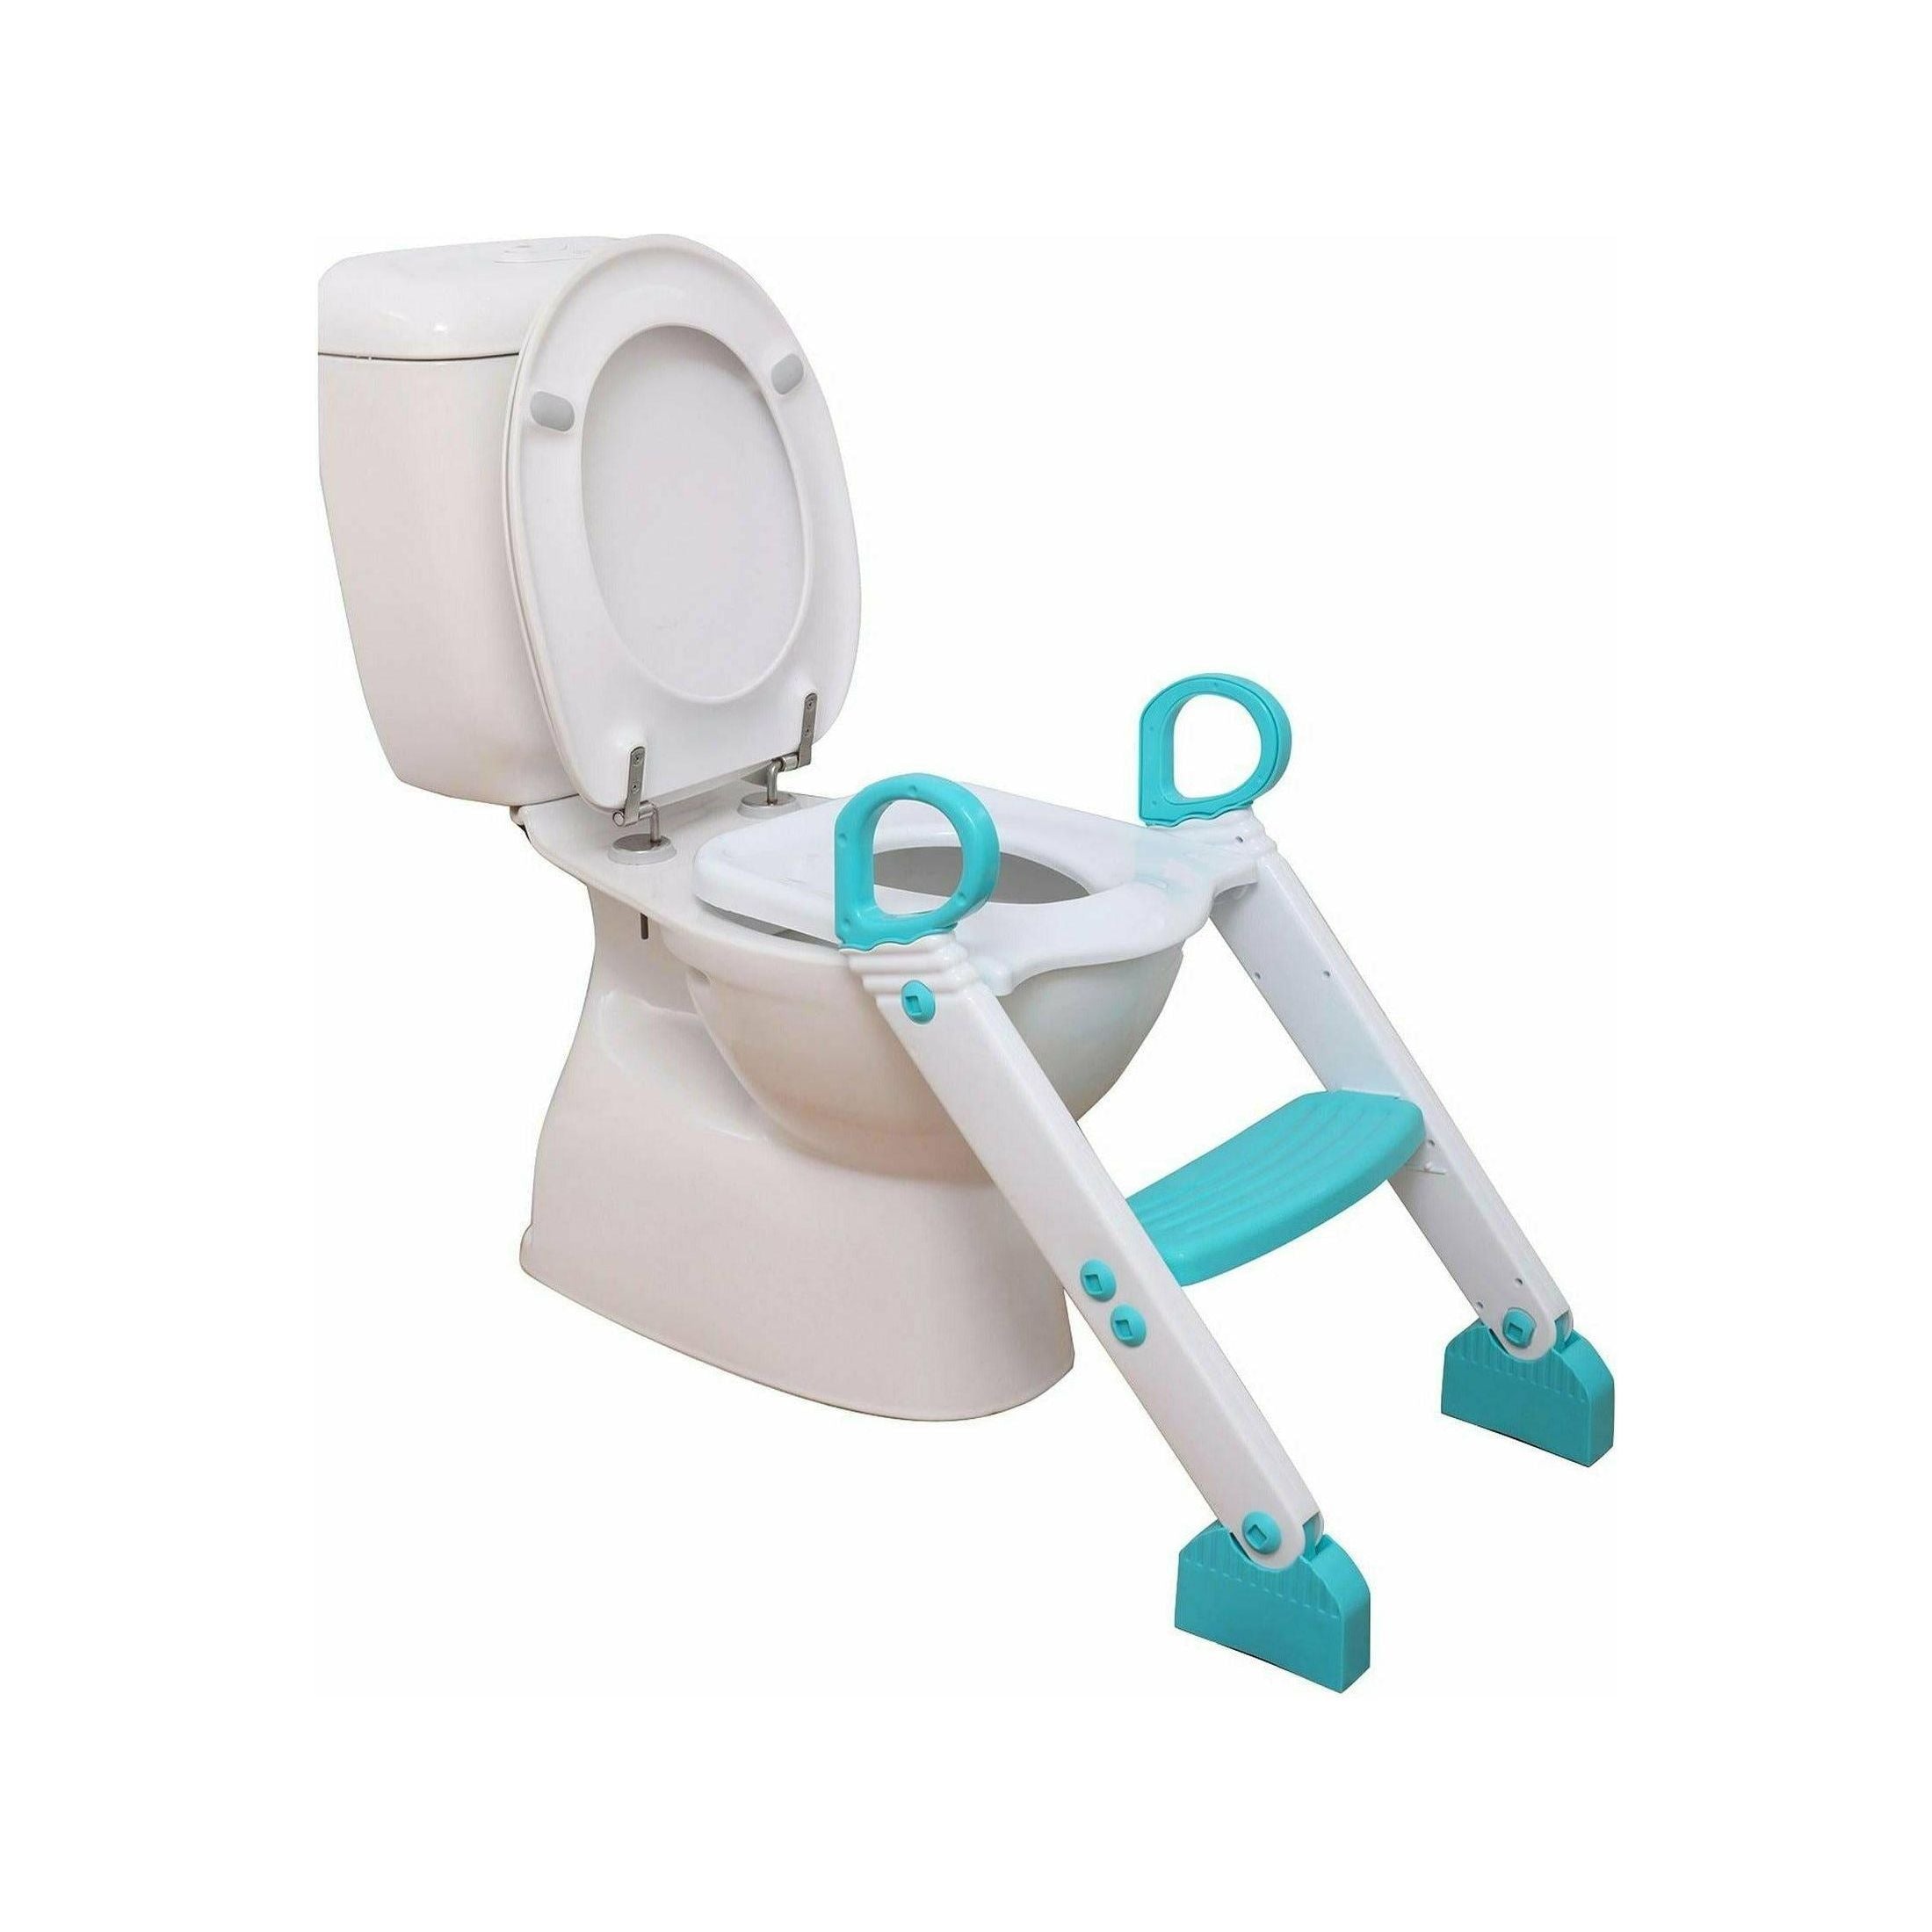 Dreambaby G6015 Step-up Toilet Topper Ladder – Aqua - White - BumbleToys - 0-24 Months, 2-4 Years, Babies, Baby Saftey & Health, Boys, Girls, Nursery Toys, Potties, Potty, Toy House